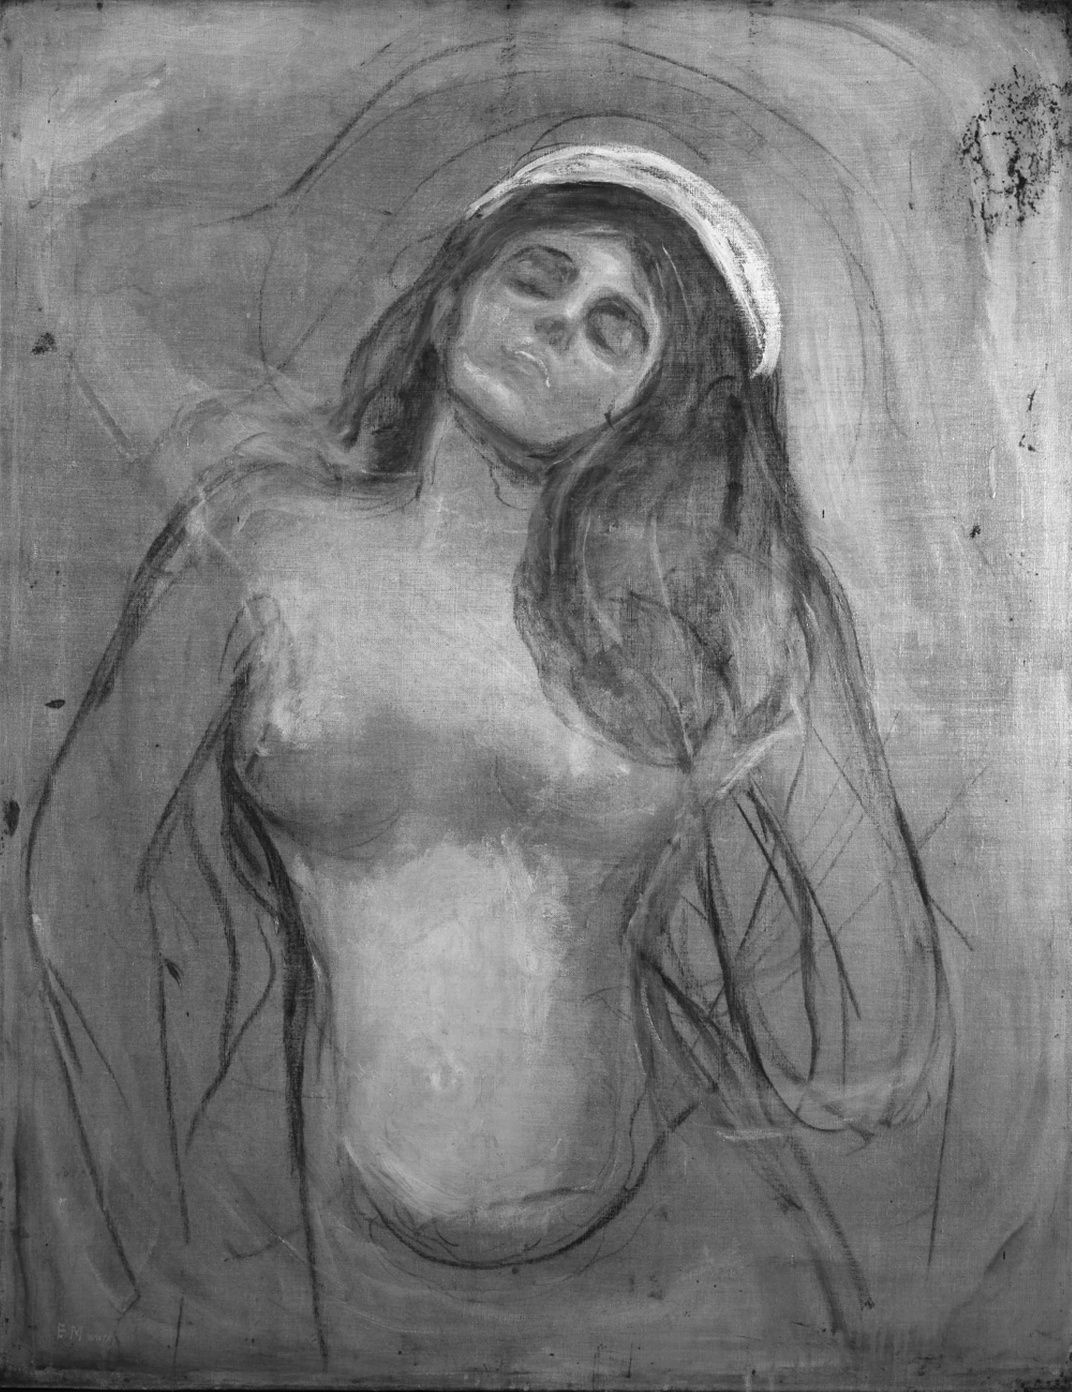 A black and white image of the underdrawing, which has the woman's arms lowered at her side